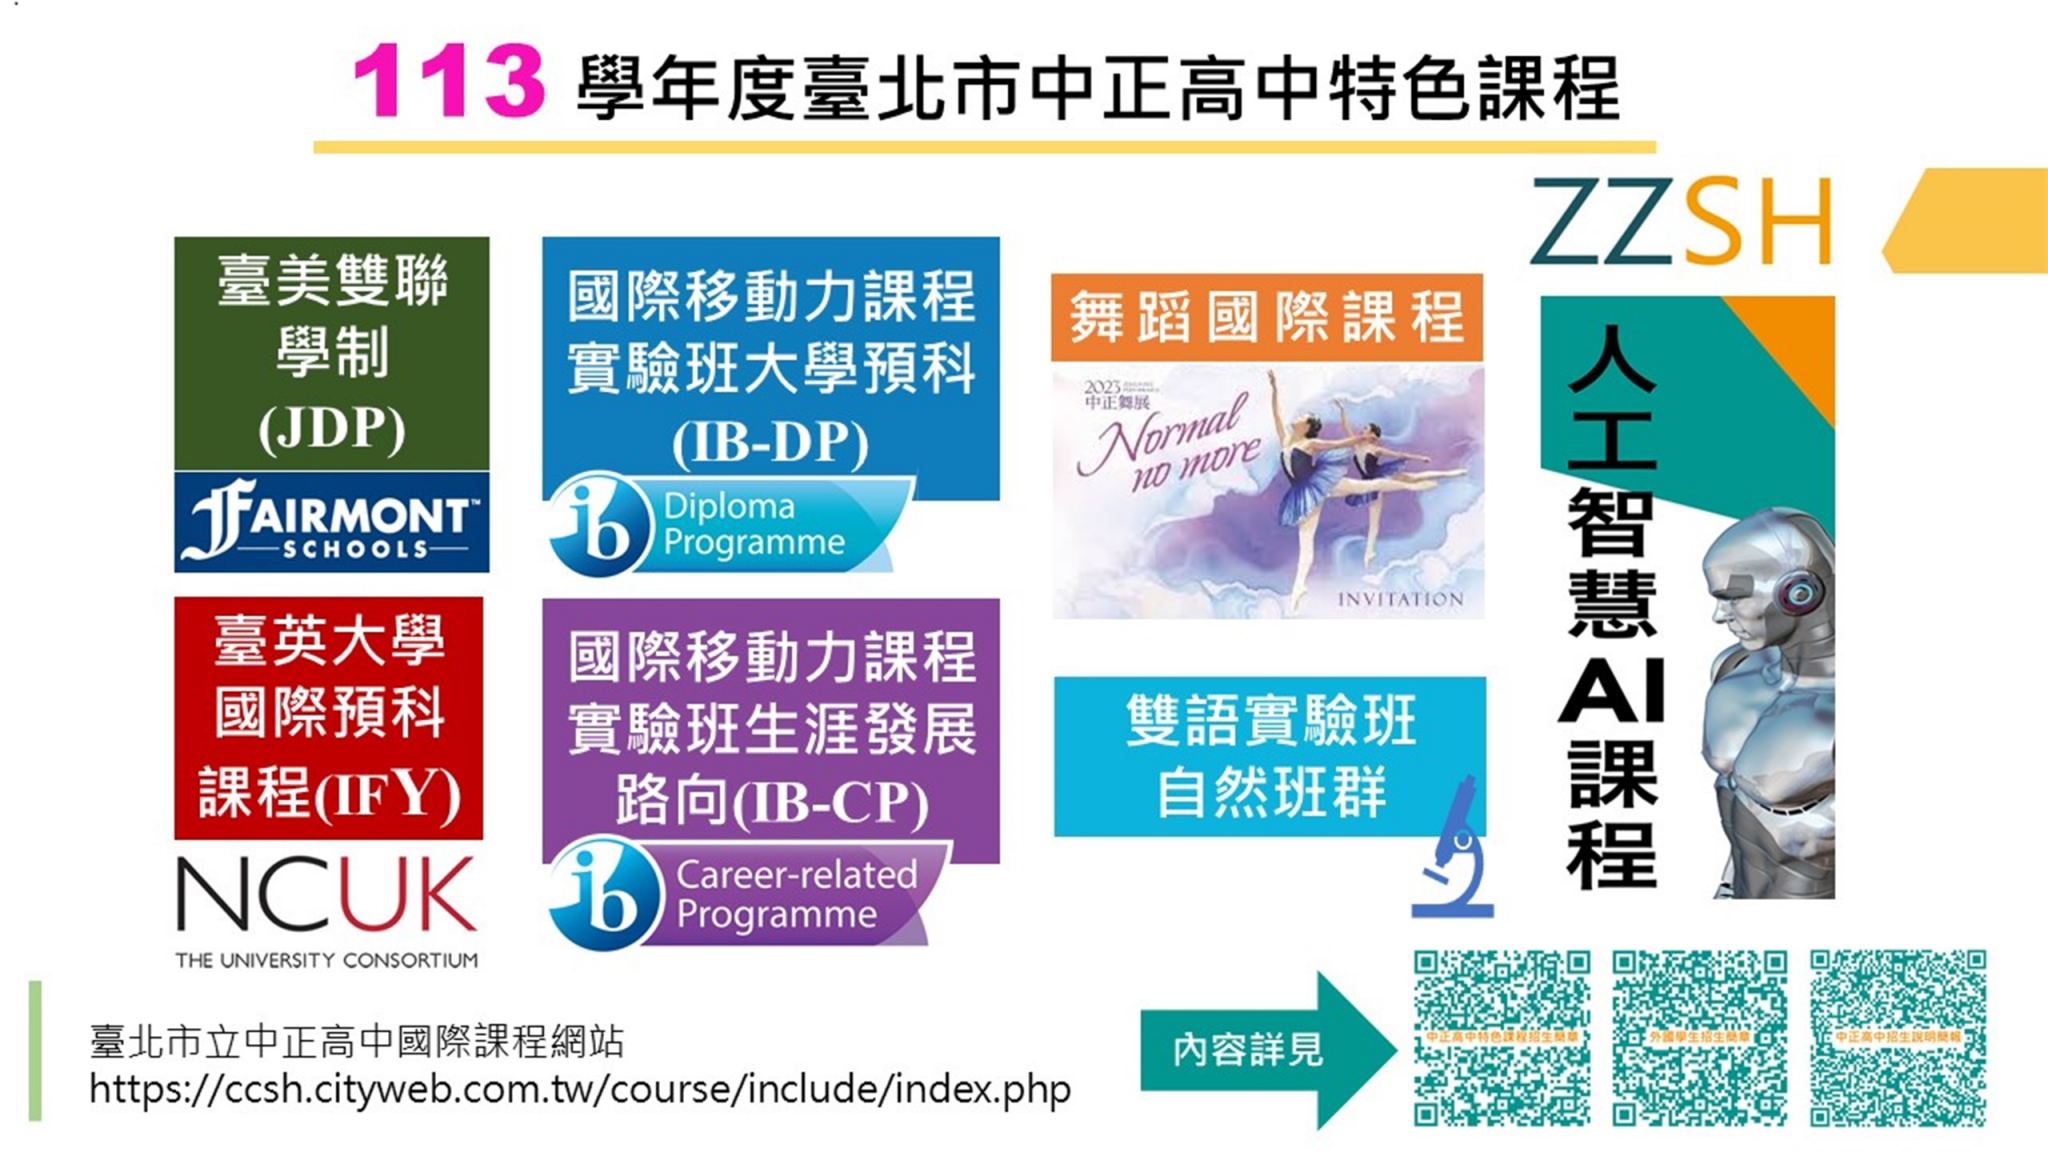 113 Acdemic Year IB Program Admission Guidelines For Foreign, Hong Kong, Macau and Lcoal Students